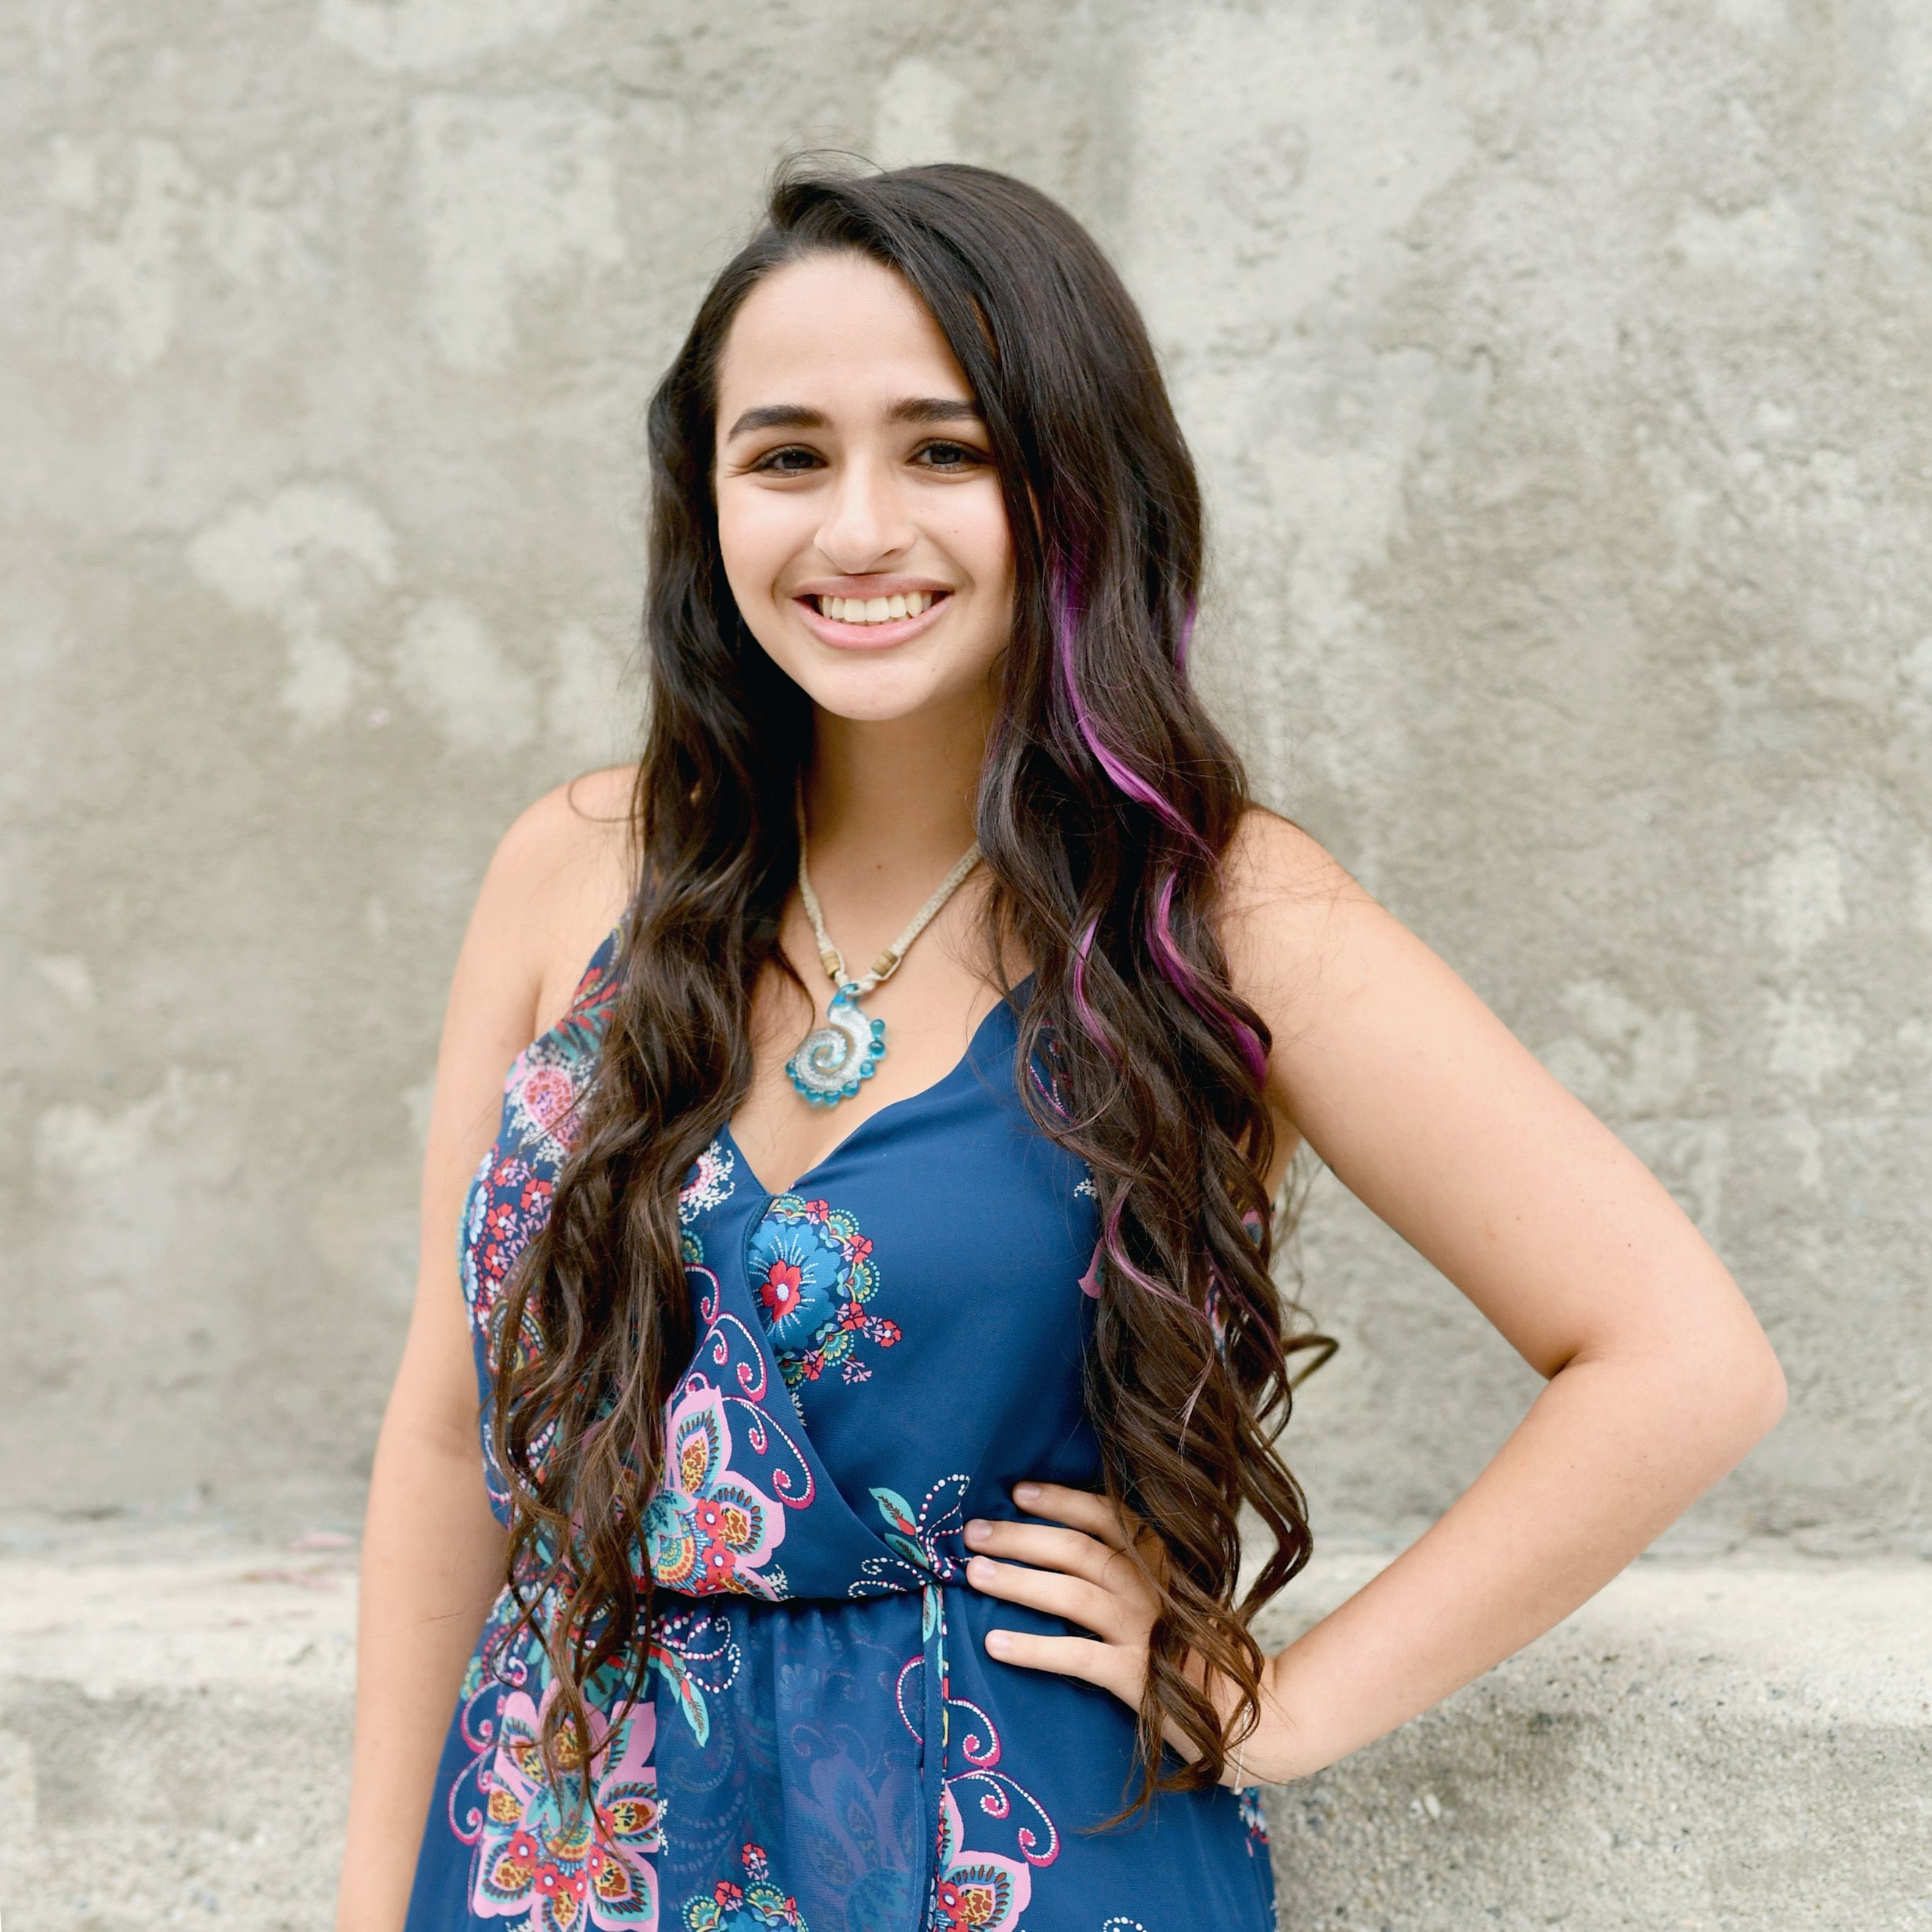 Jazz Jennings Shares More Details About Gender Surgery Complications